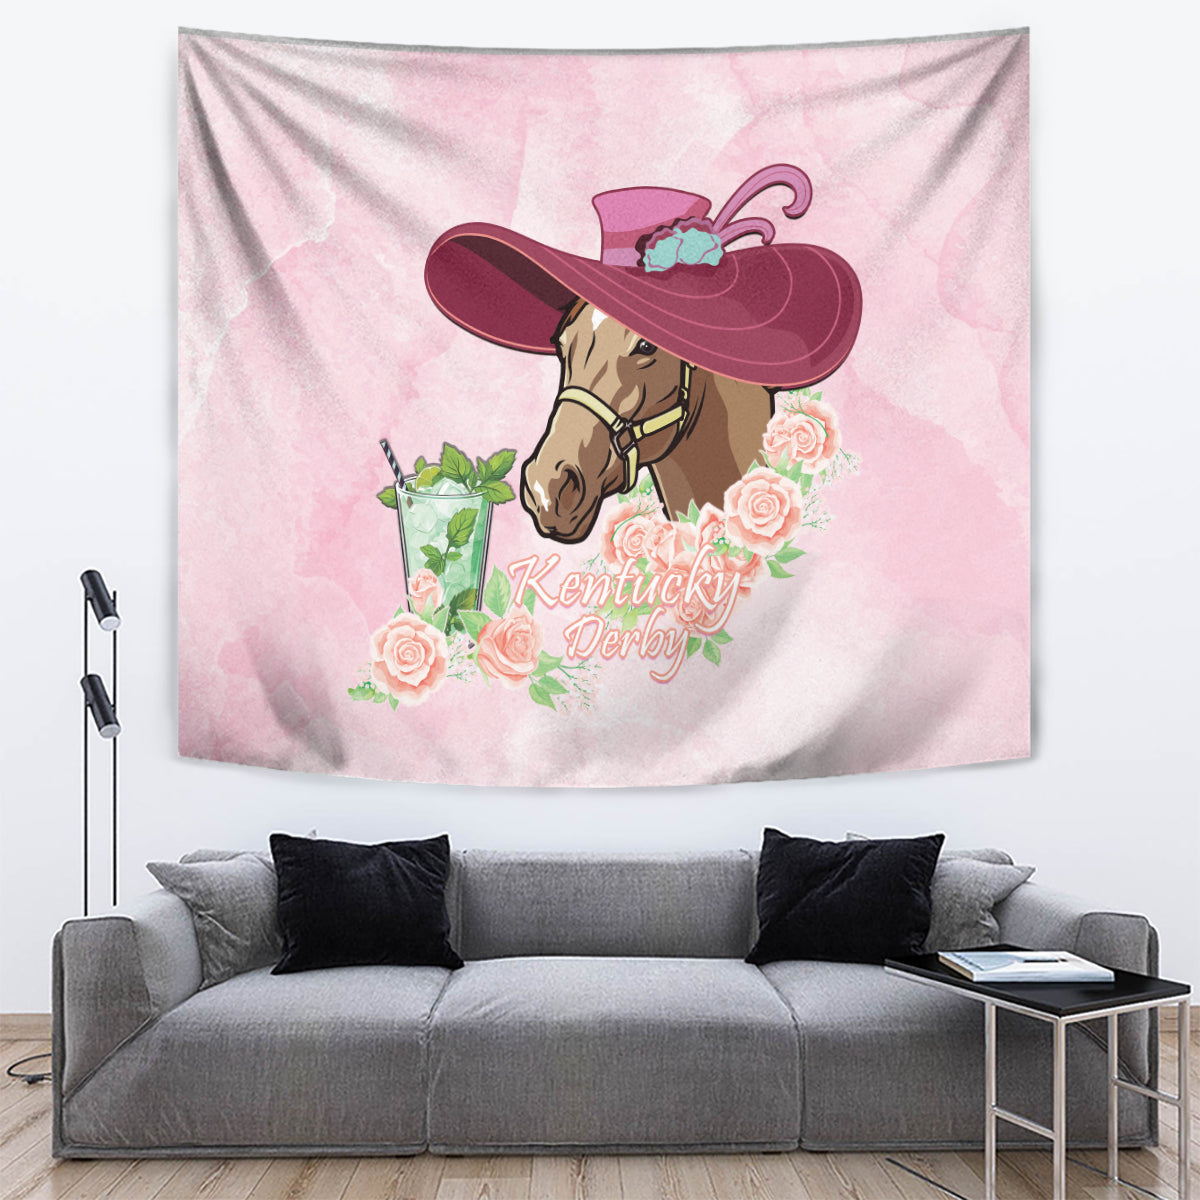 Kentucky Horse Racing Tapestry Derby Mint Julep With Roses